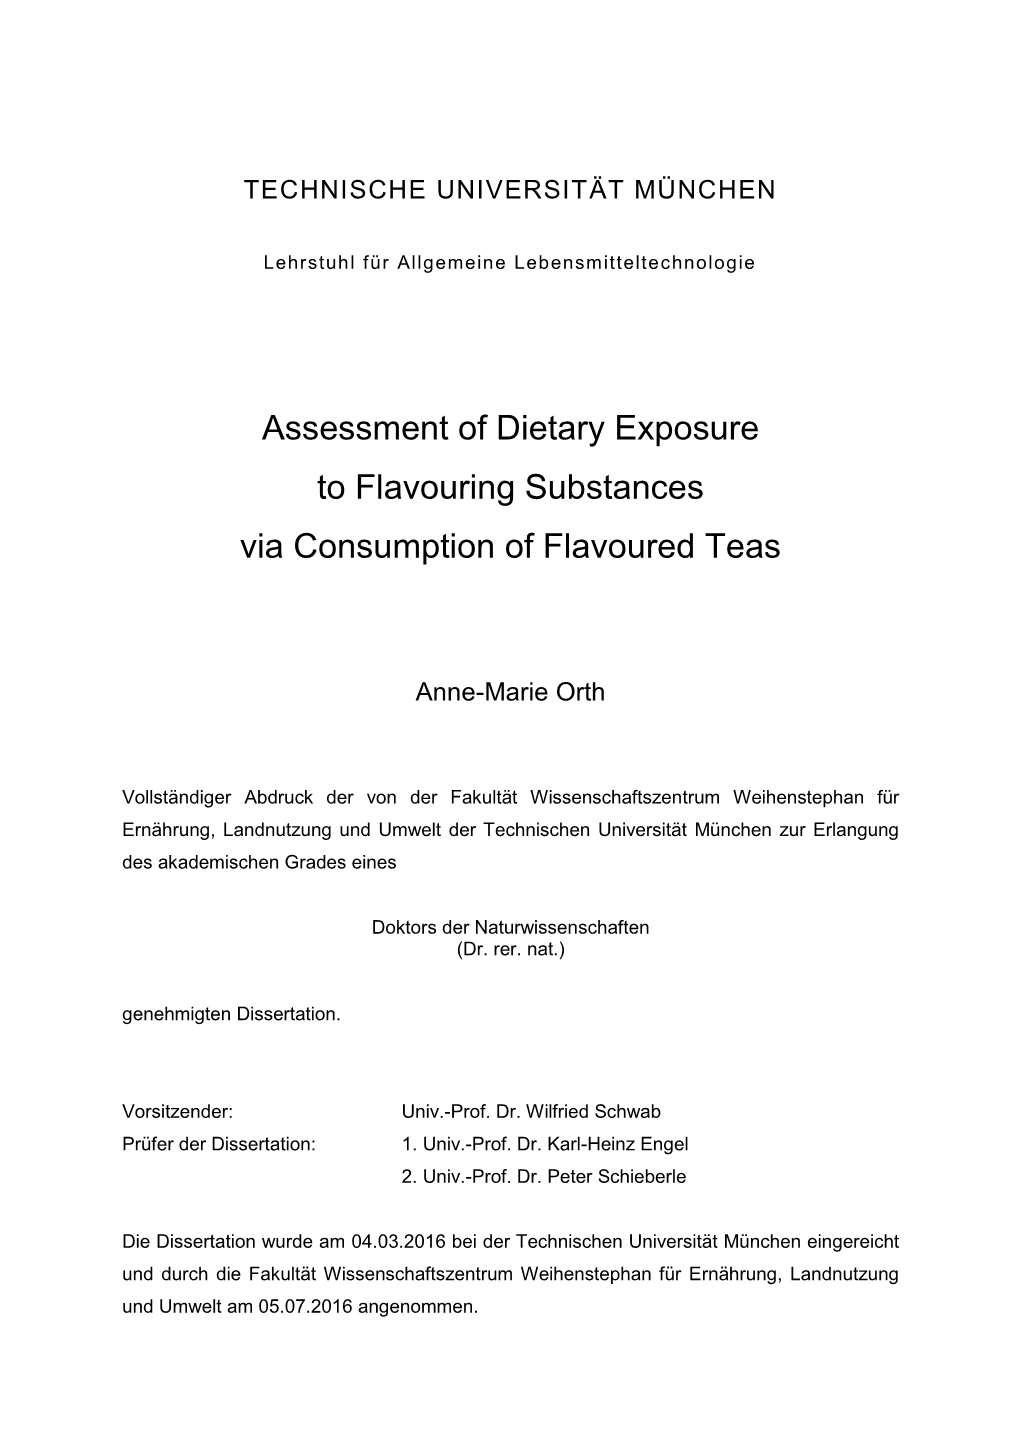 Assessment of Dietary Exposure to Flavouring Substances Via Consumption of Flavoured Teas